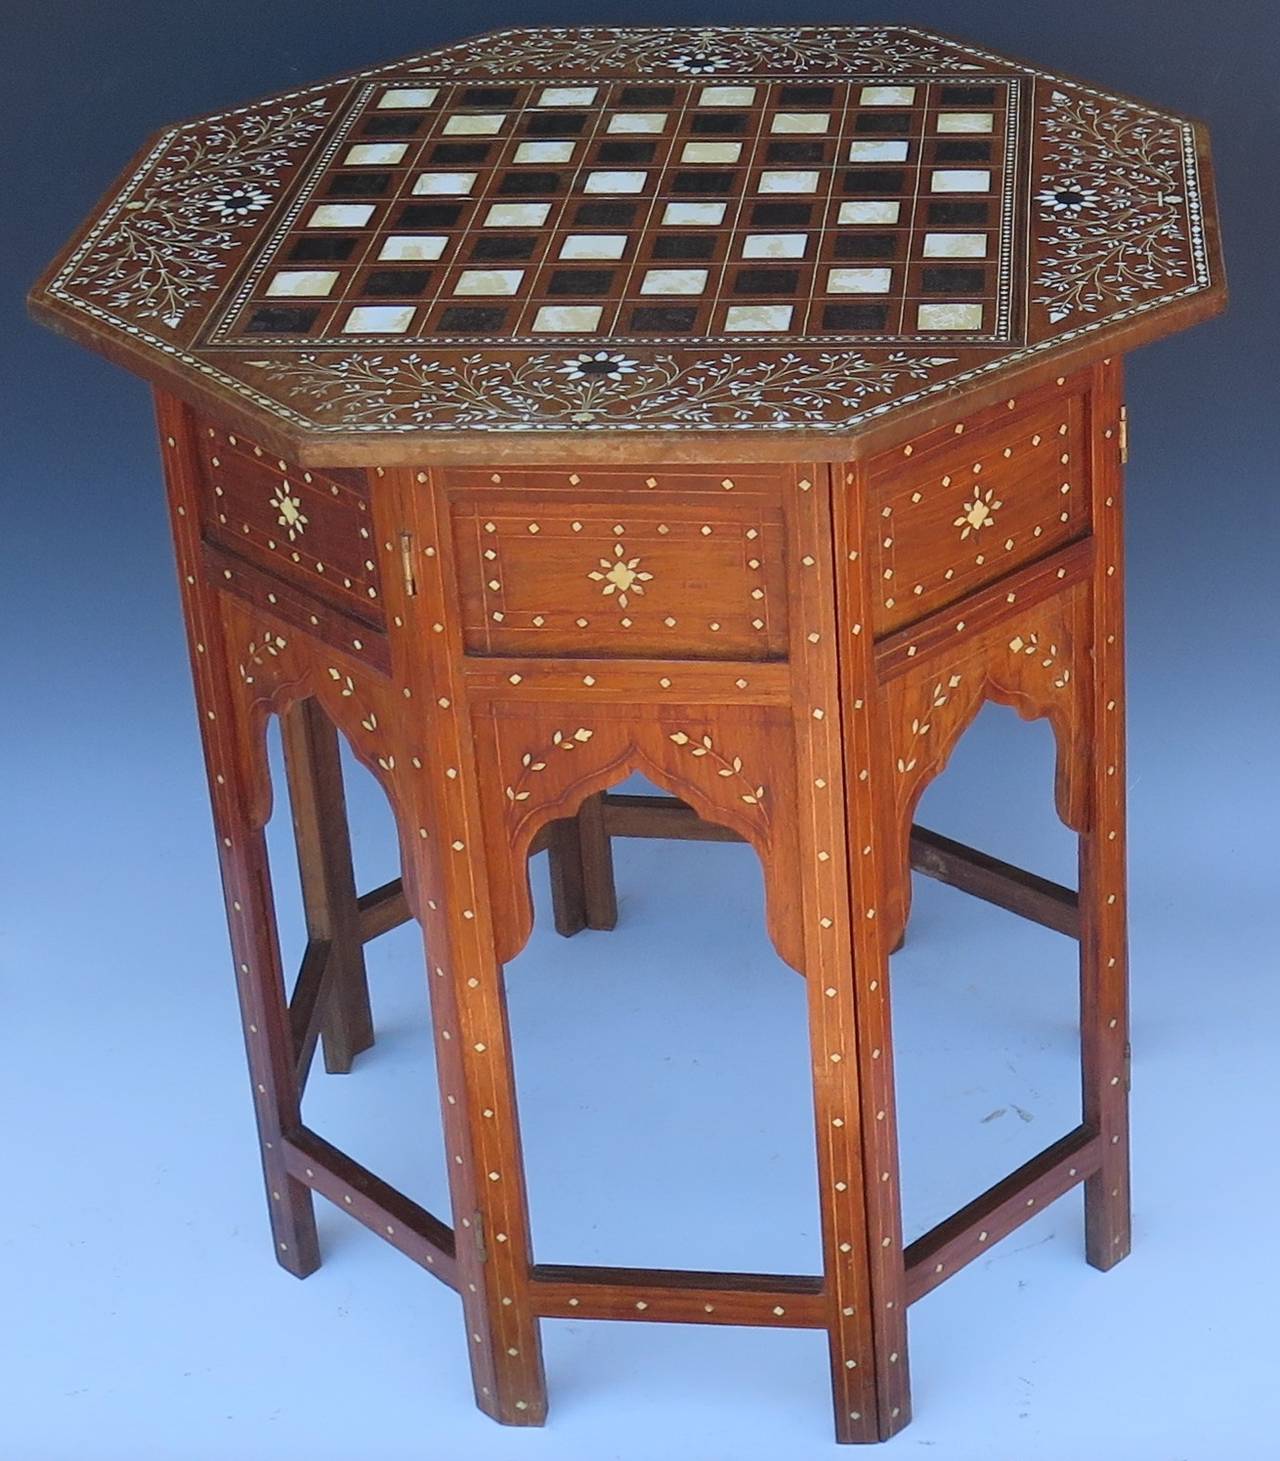 Beautiful, rare, early Anglo Indian folding table with checker board inlay pattern table.